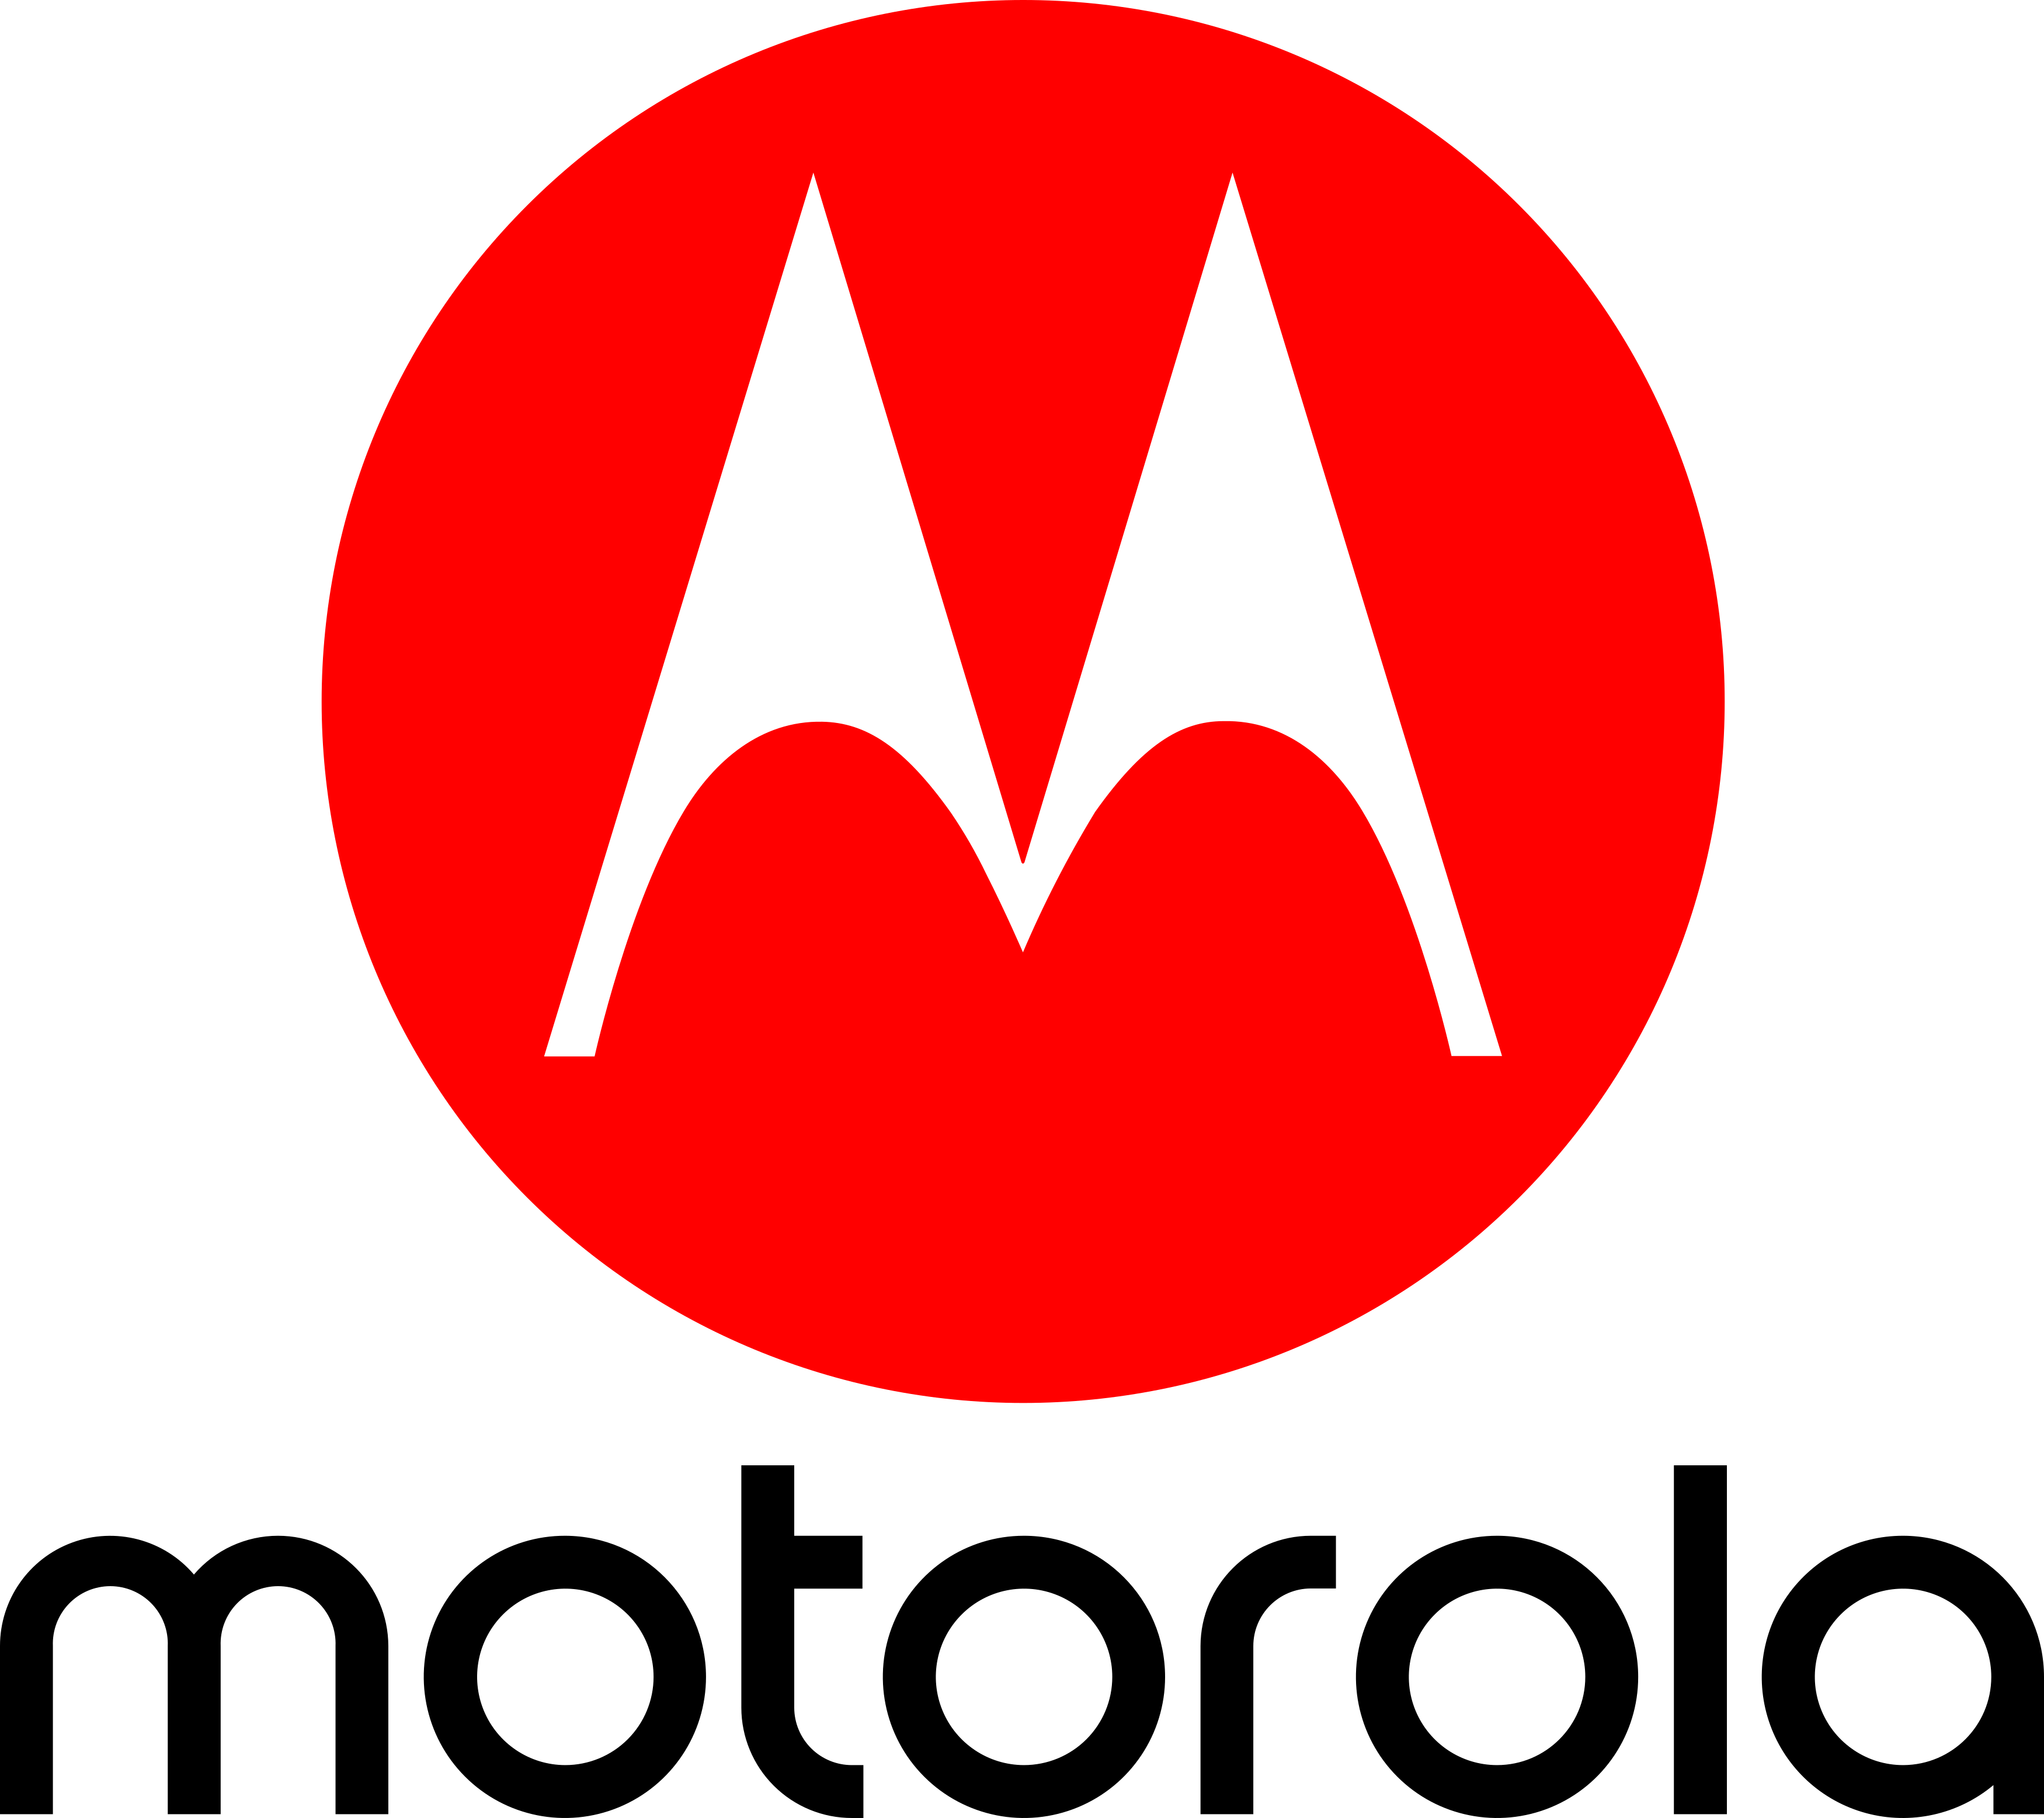 This product's manufacturer is Motorola